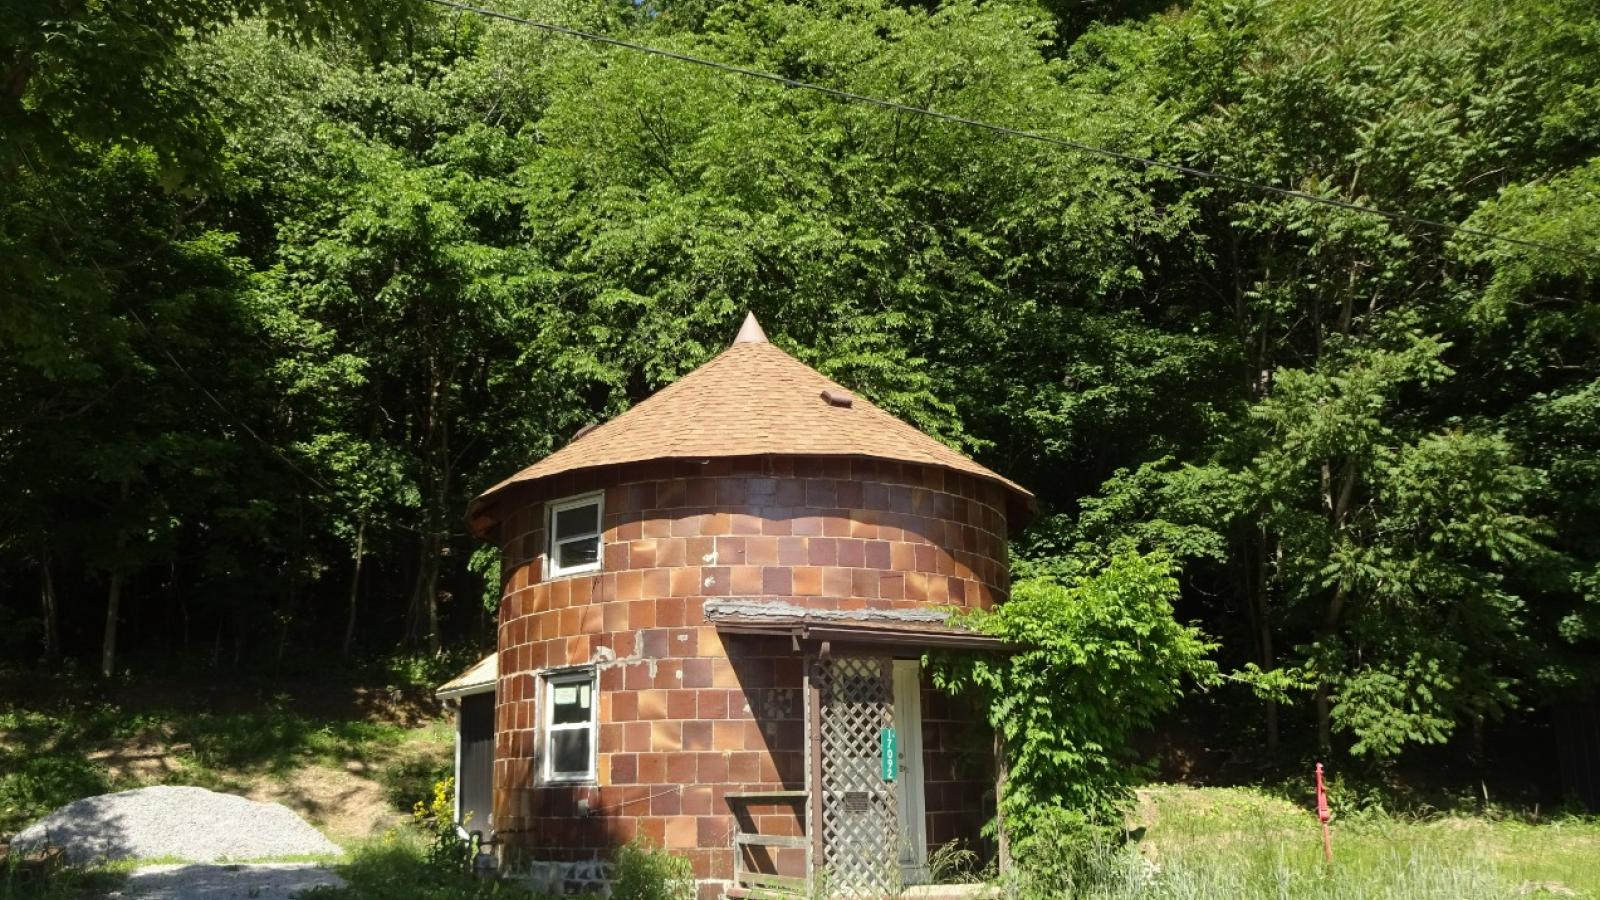 A round, silo-looking brick house with a pointed roof and curved, glazed, shiny brick walls. It is currently unoccupied and shows signs of neglect (e.g., no driveway or clear lawn). The round house is surrounded by the forest on all sides.